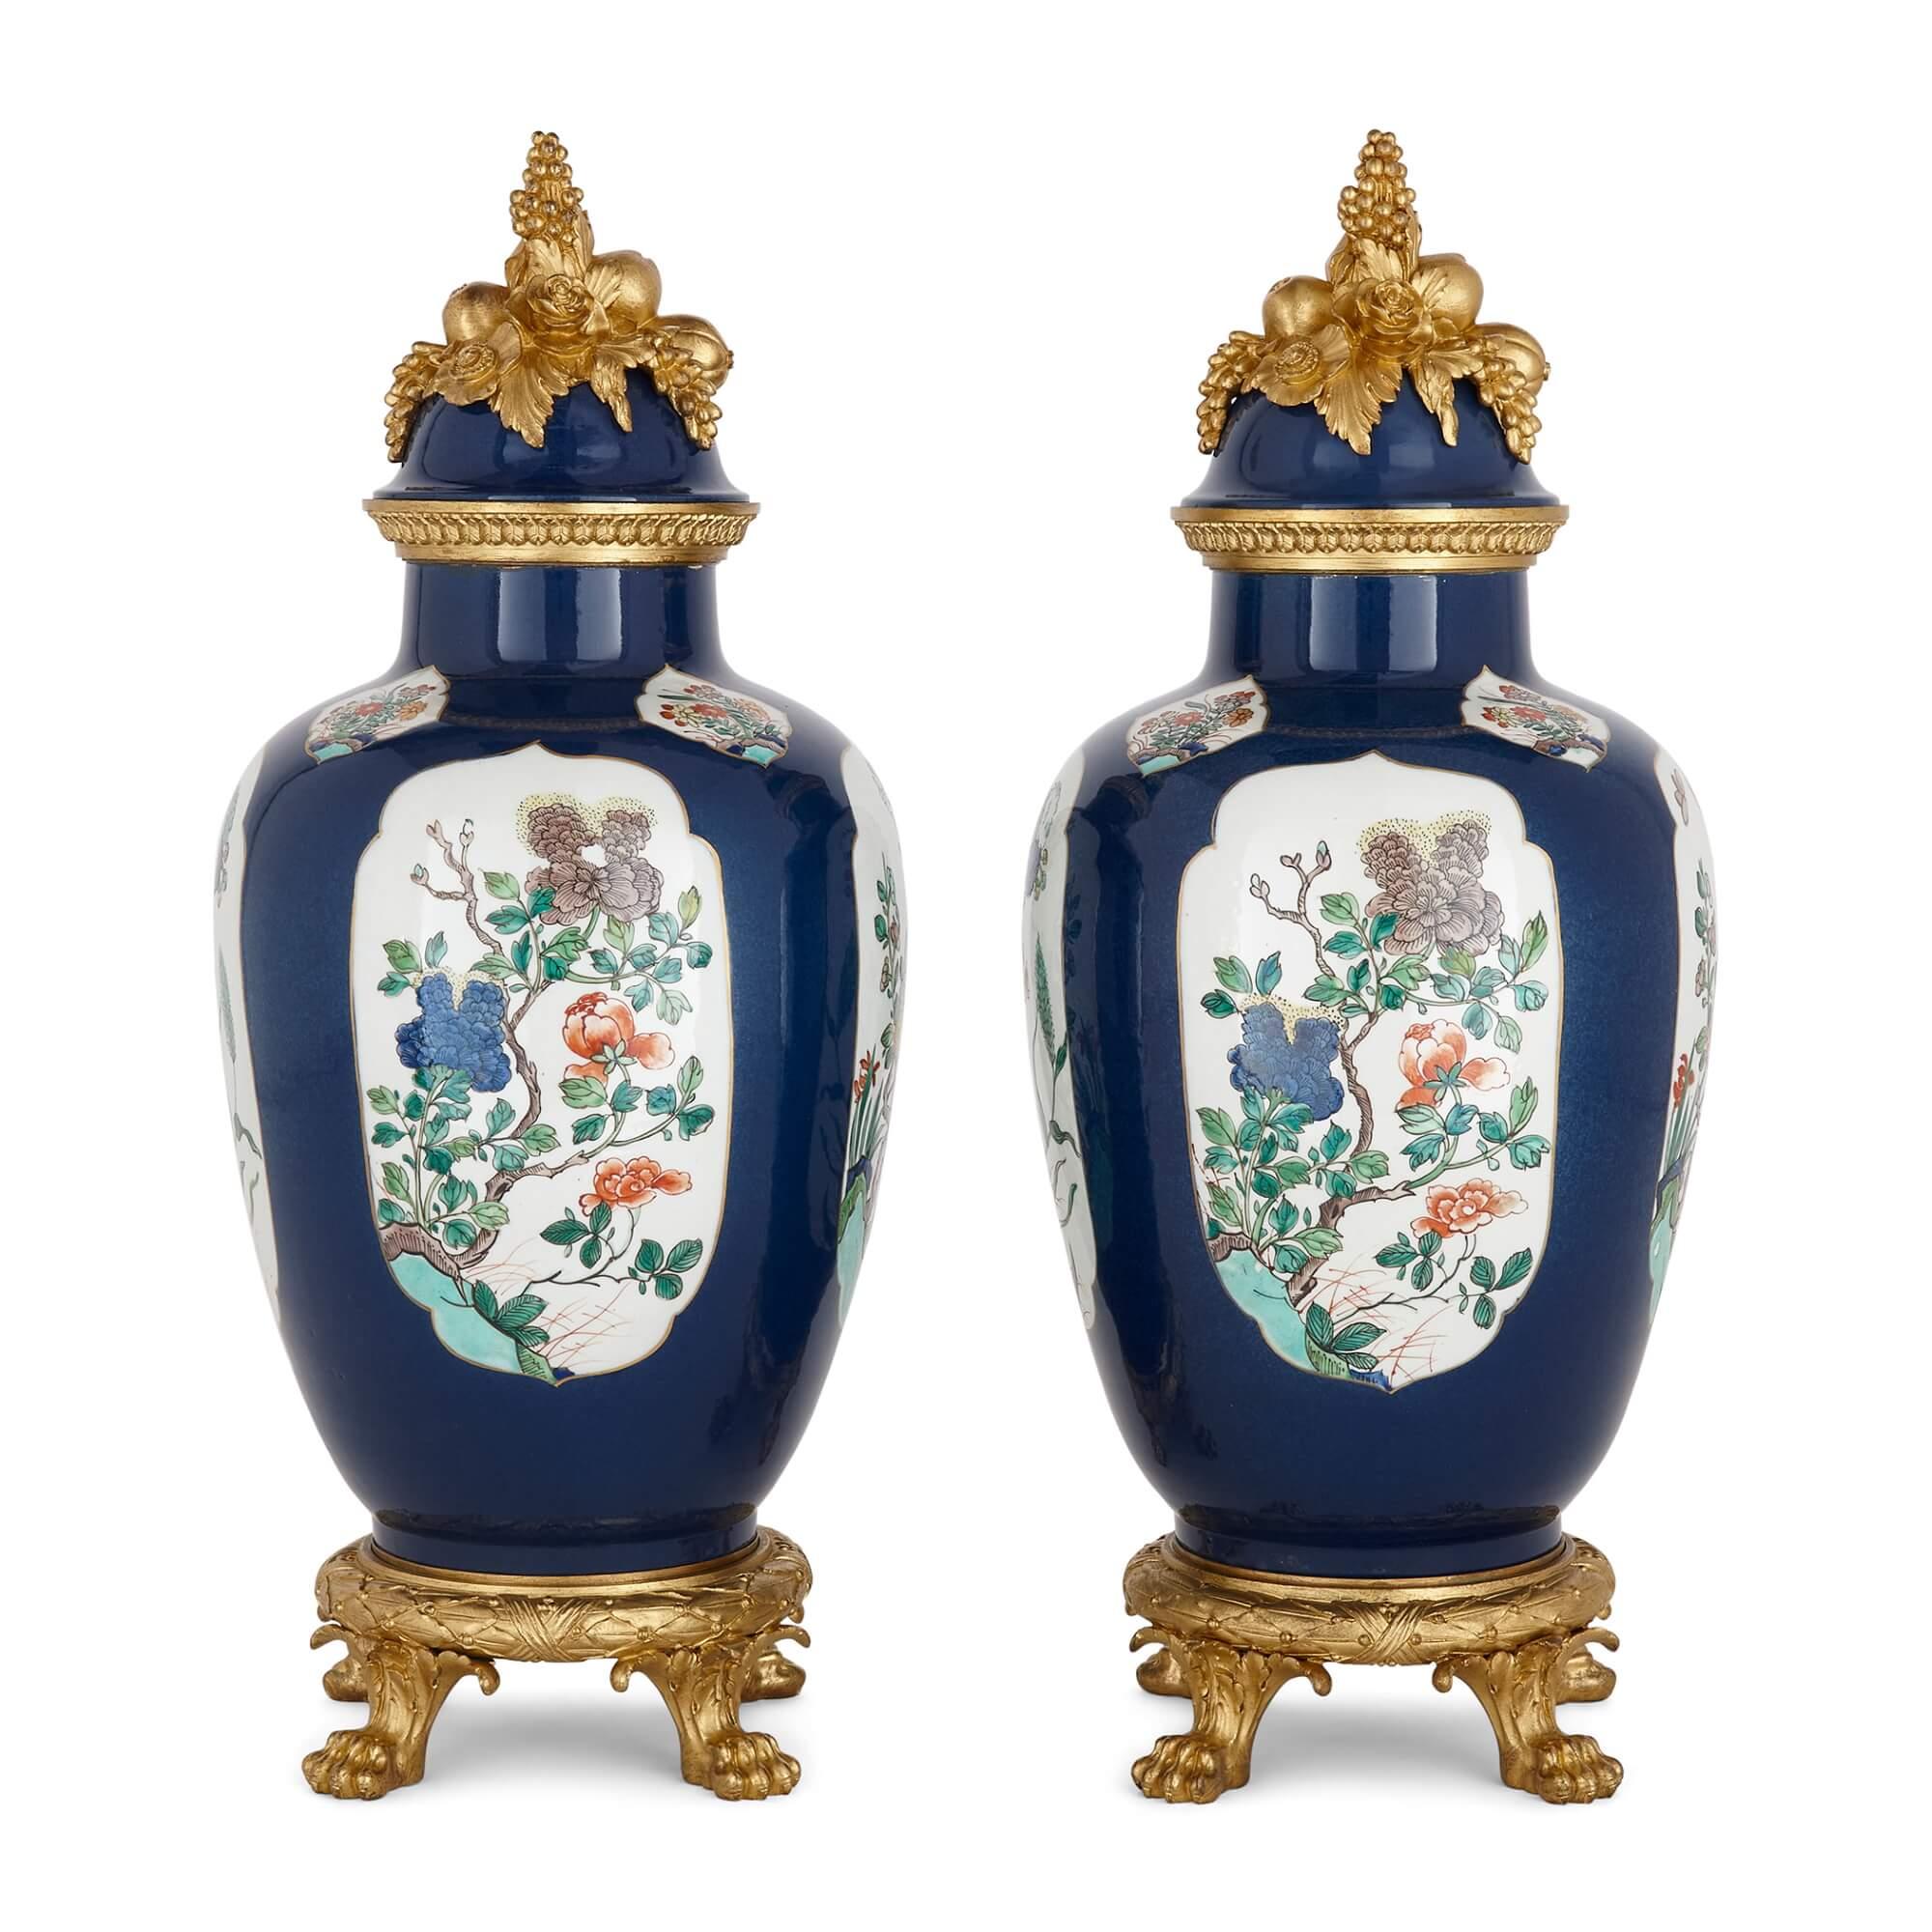 Pair of large French Samson porcelain and gilt bronze Chinoiserie vases 
French, Late 19th Century 
Height 57cm, diameter 24cm

This superb pair of vases was crafted in the late 19th century by the renowned French firm of Samson et Cie. They have